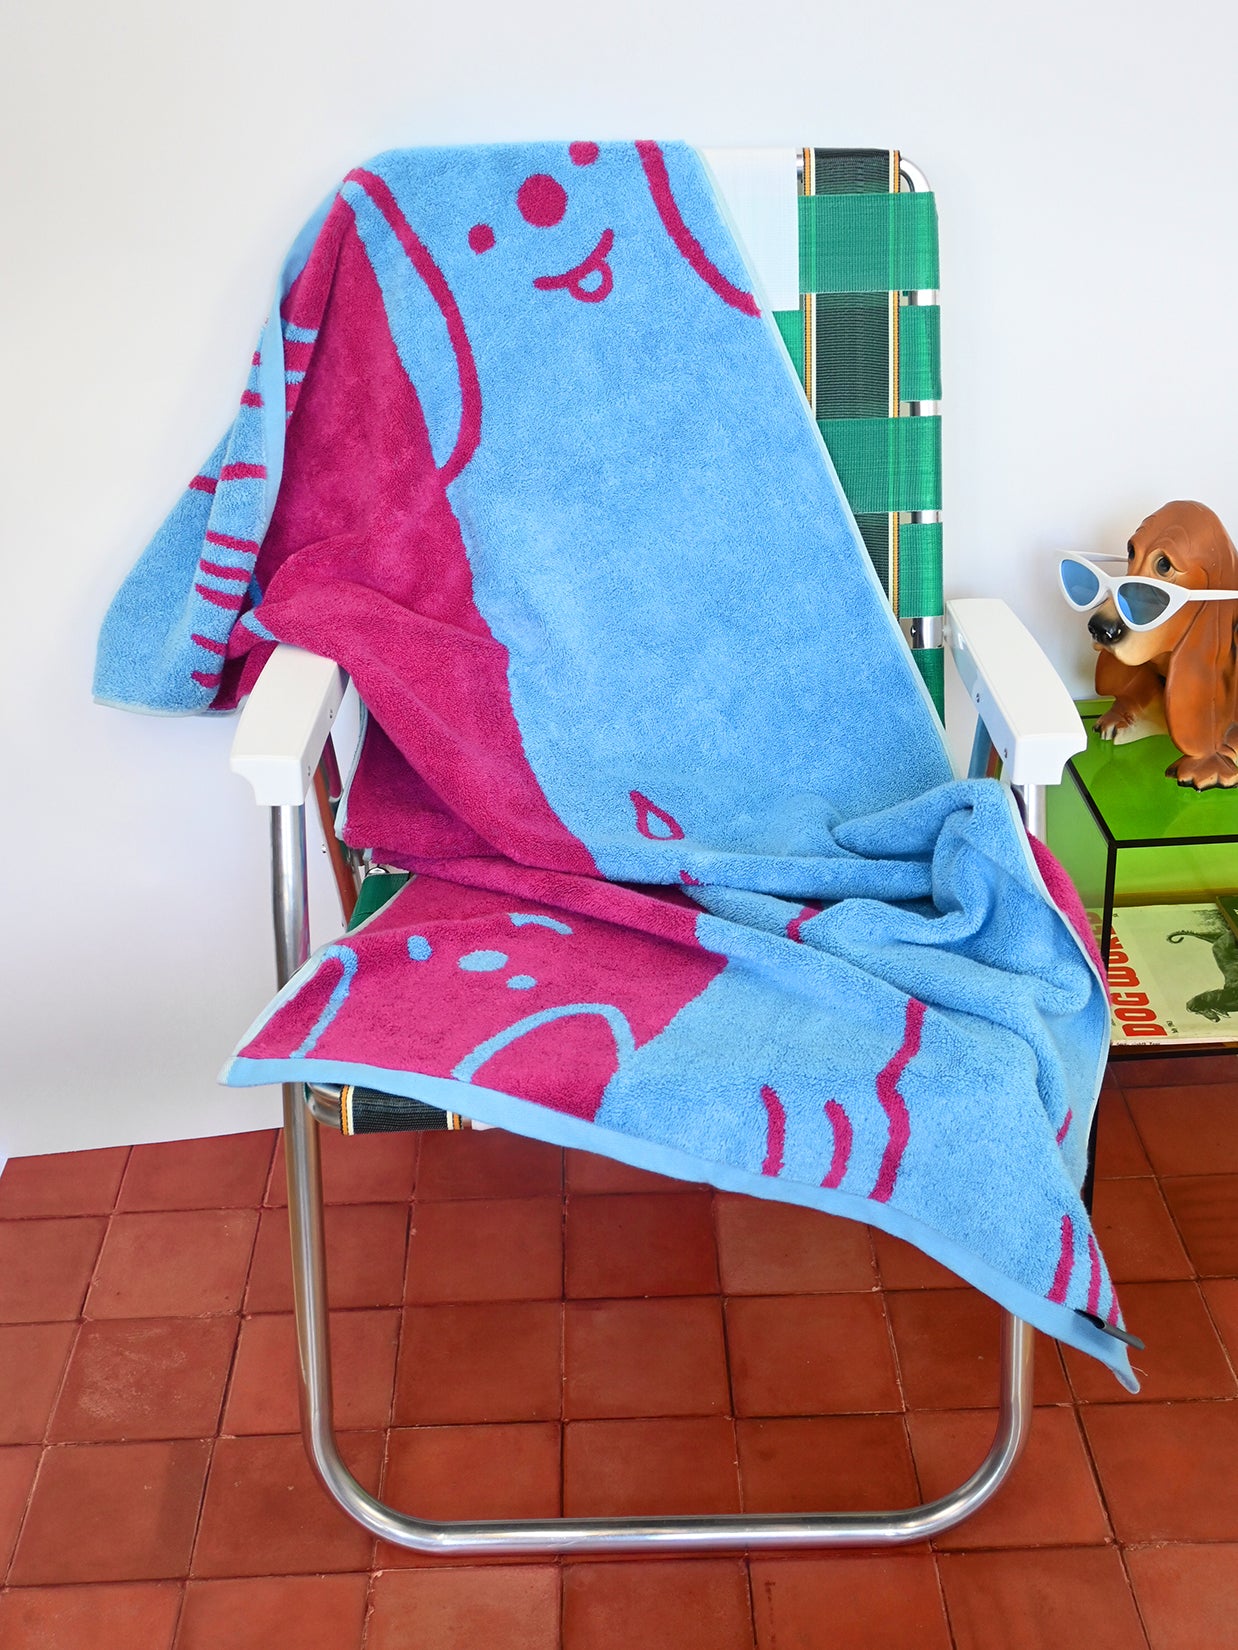 "WET DOGS" collection of terry cloth bath towels and bathmats. Natali Koromoto x Ho Hos Hole in The Wall -- Designed in Brooklyn, NY. Made in Portugal with BCI Cotton, Oeko-Tex Standard 100.